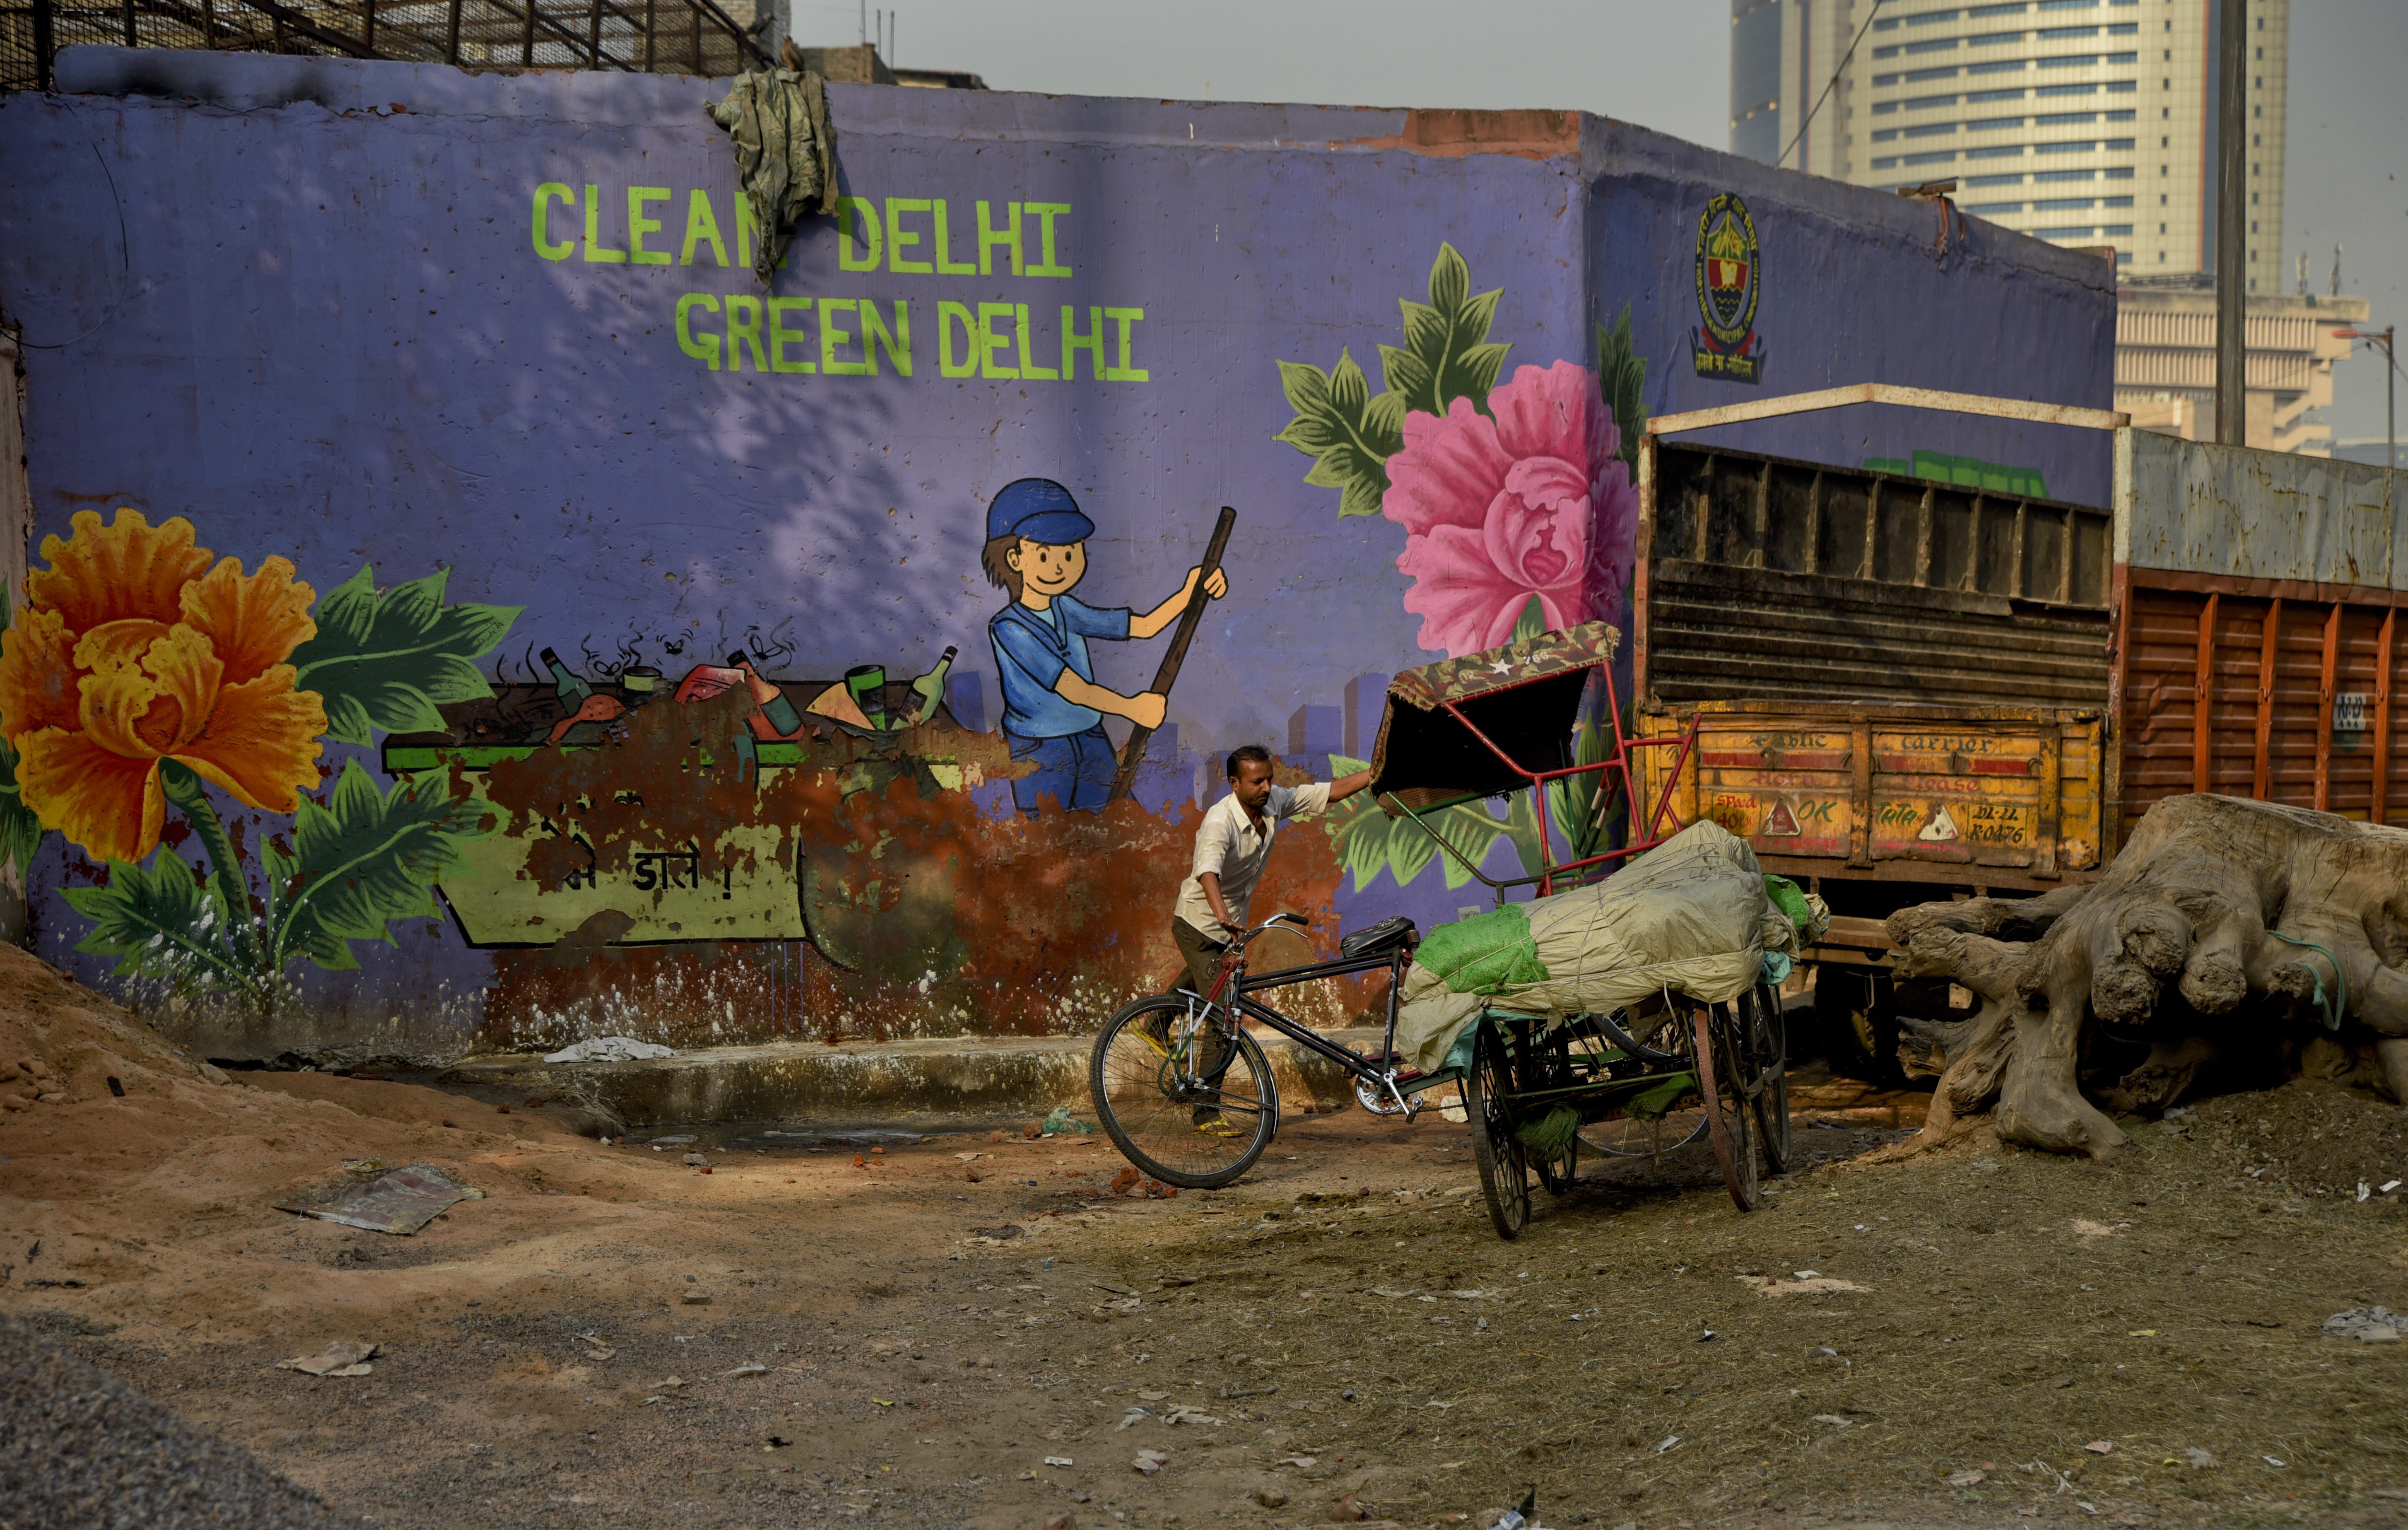 An Indian cycle rickshaw puller maneuvers his rickshaw past an awareness mural campaigning for a clean and green Delhi in New Delhi, India - AP